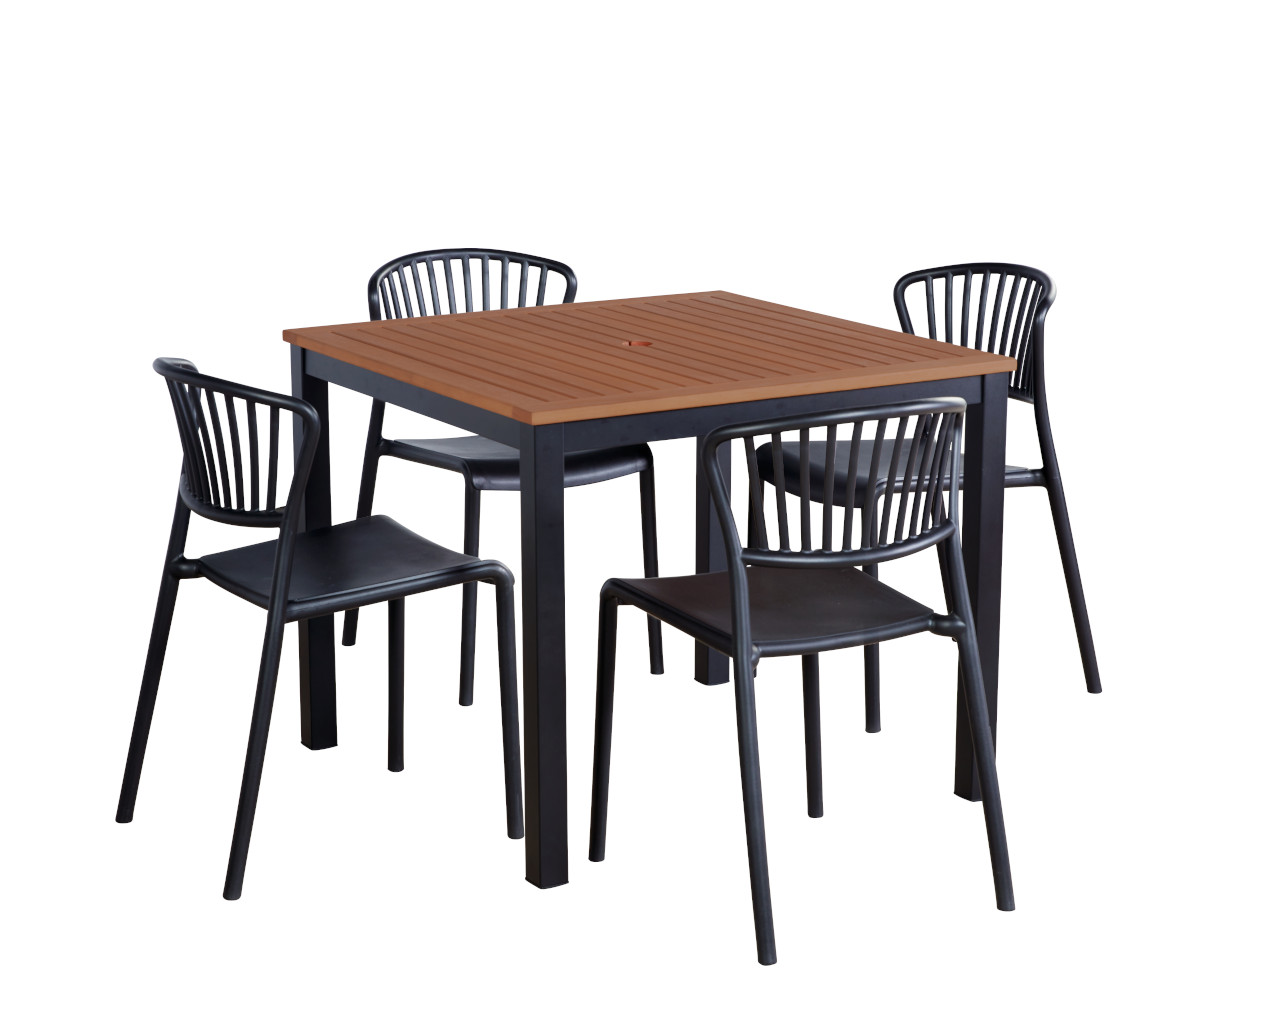 Florence-Lynx 5 Piece Dining Setting (Black), , hi-res image number null